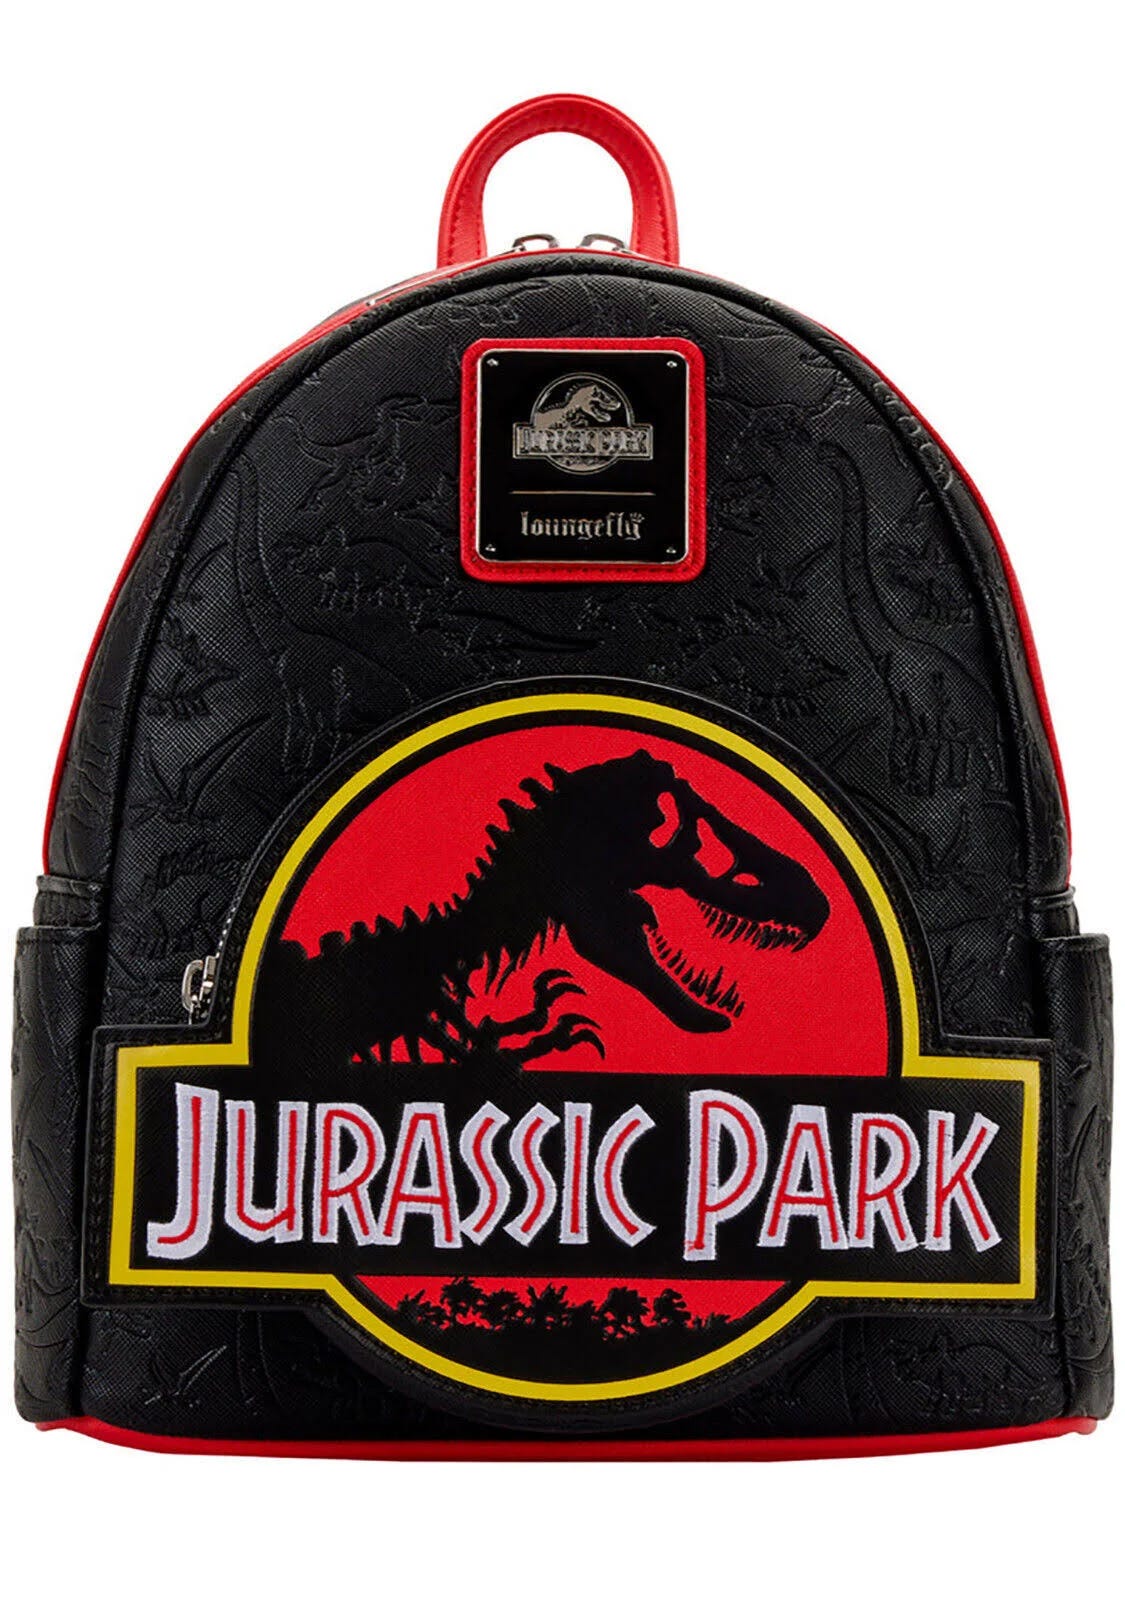 Jurassic Park Logo Mini Backpack - Loungefly Collection | Image